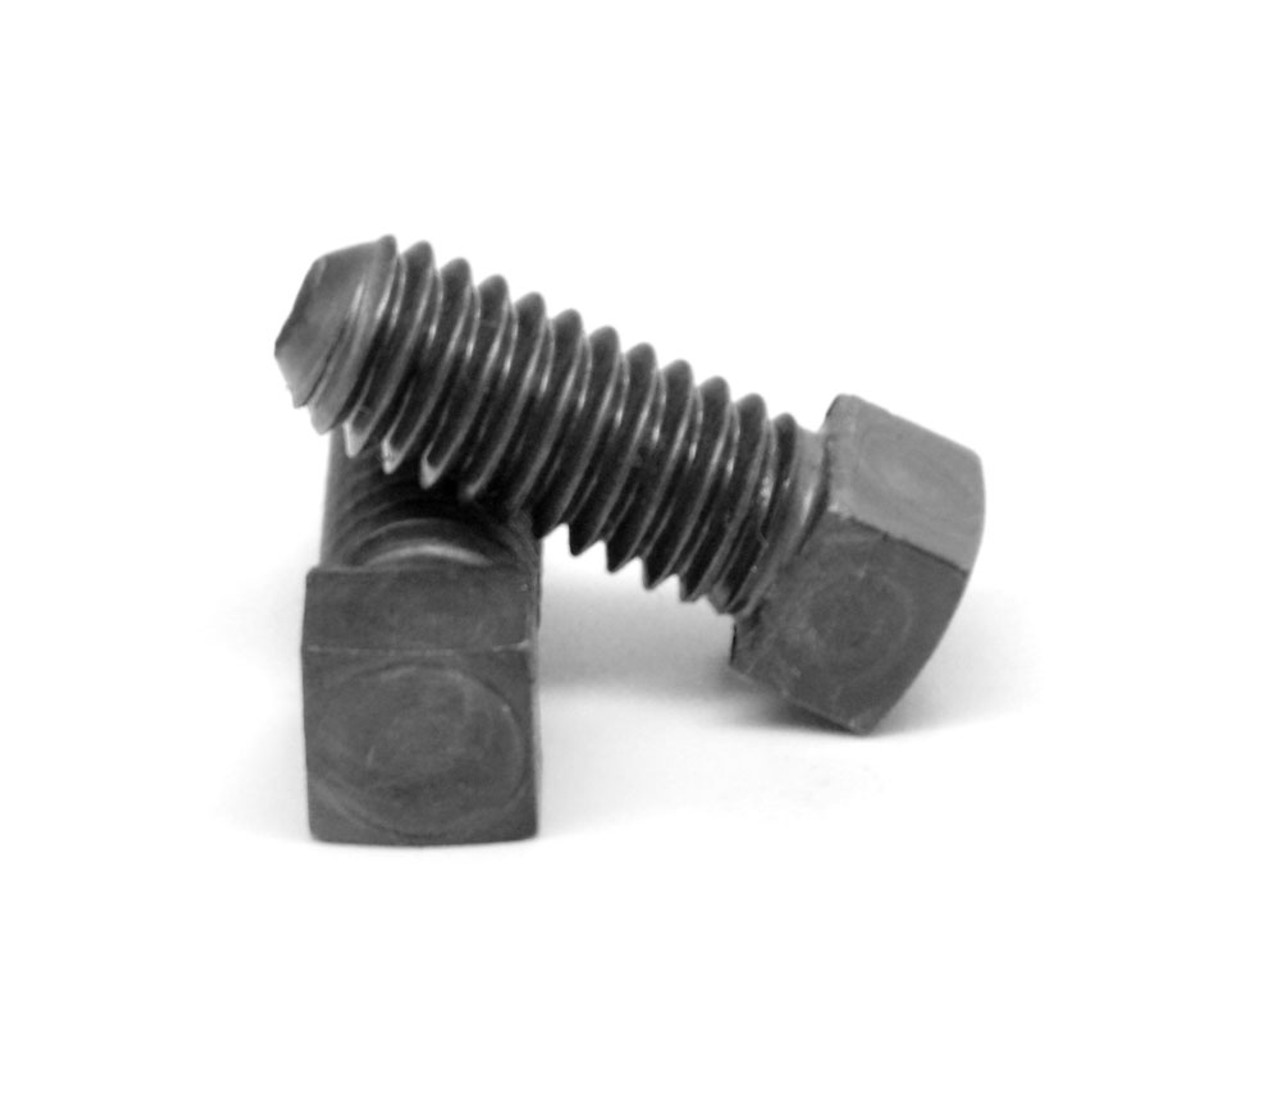 7/16"-14 x 1 1/2" (FT) Coarse Thread Square Head Set Screw Cup Point Low Carbon Steel Case Hardened Plain Finish